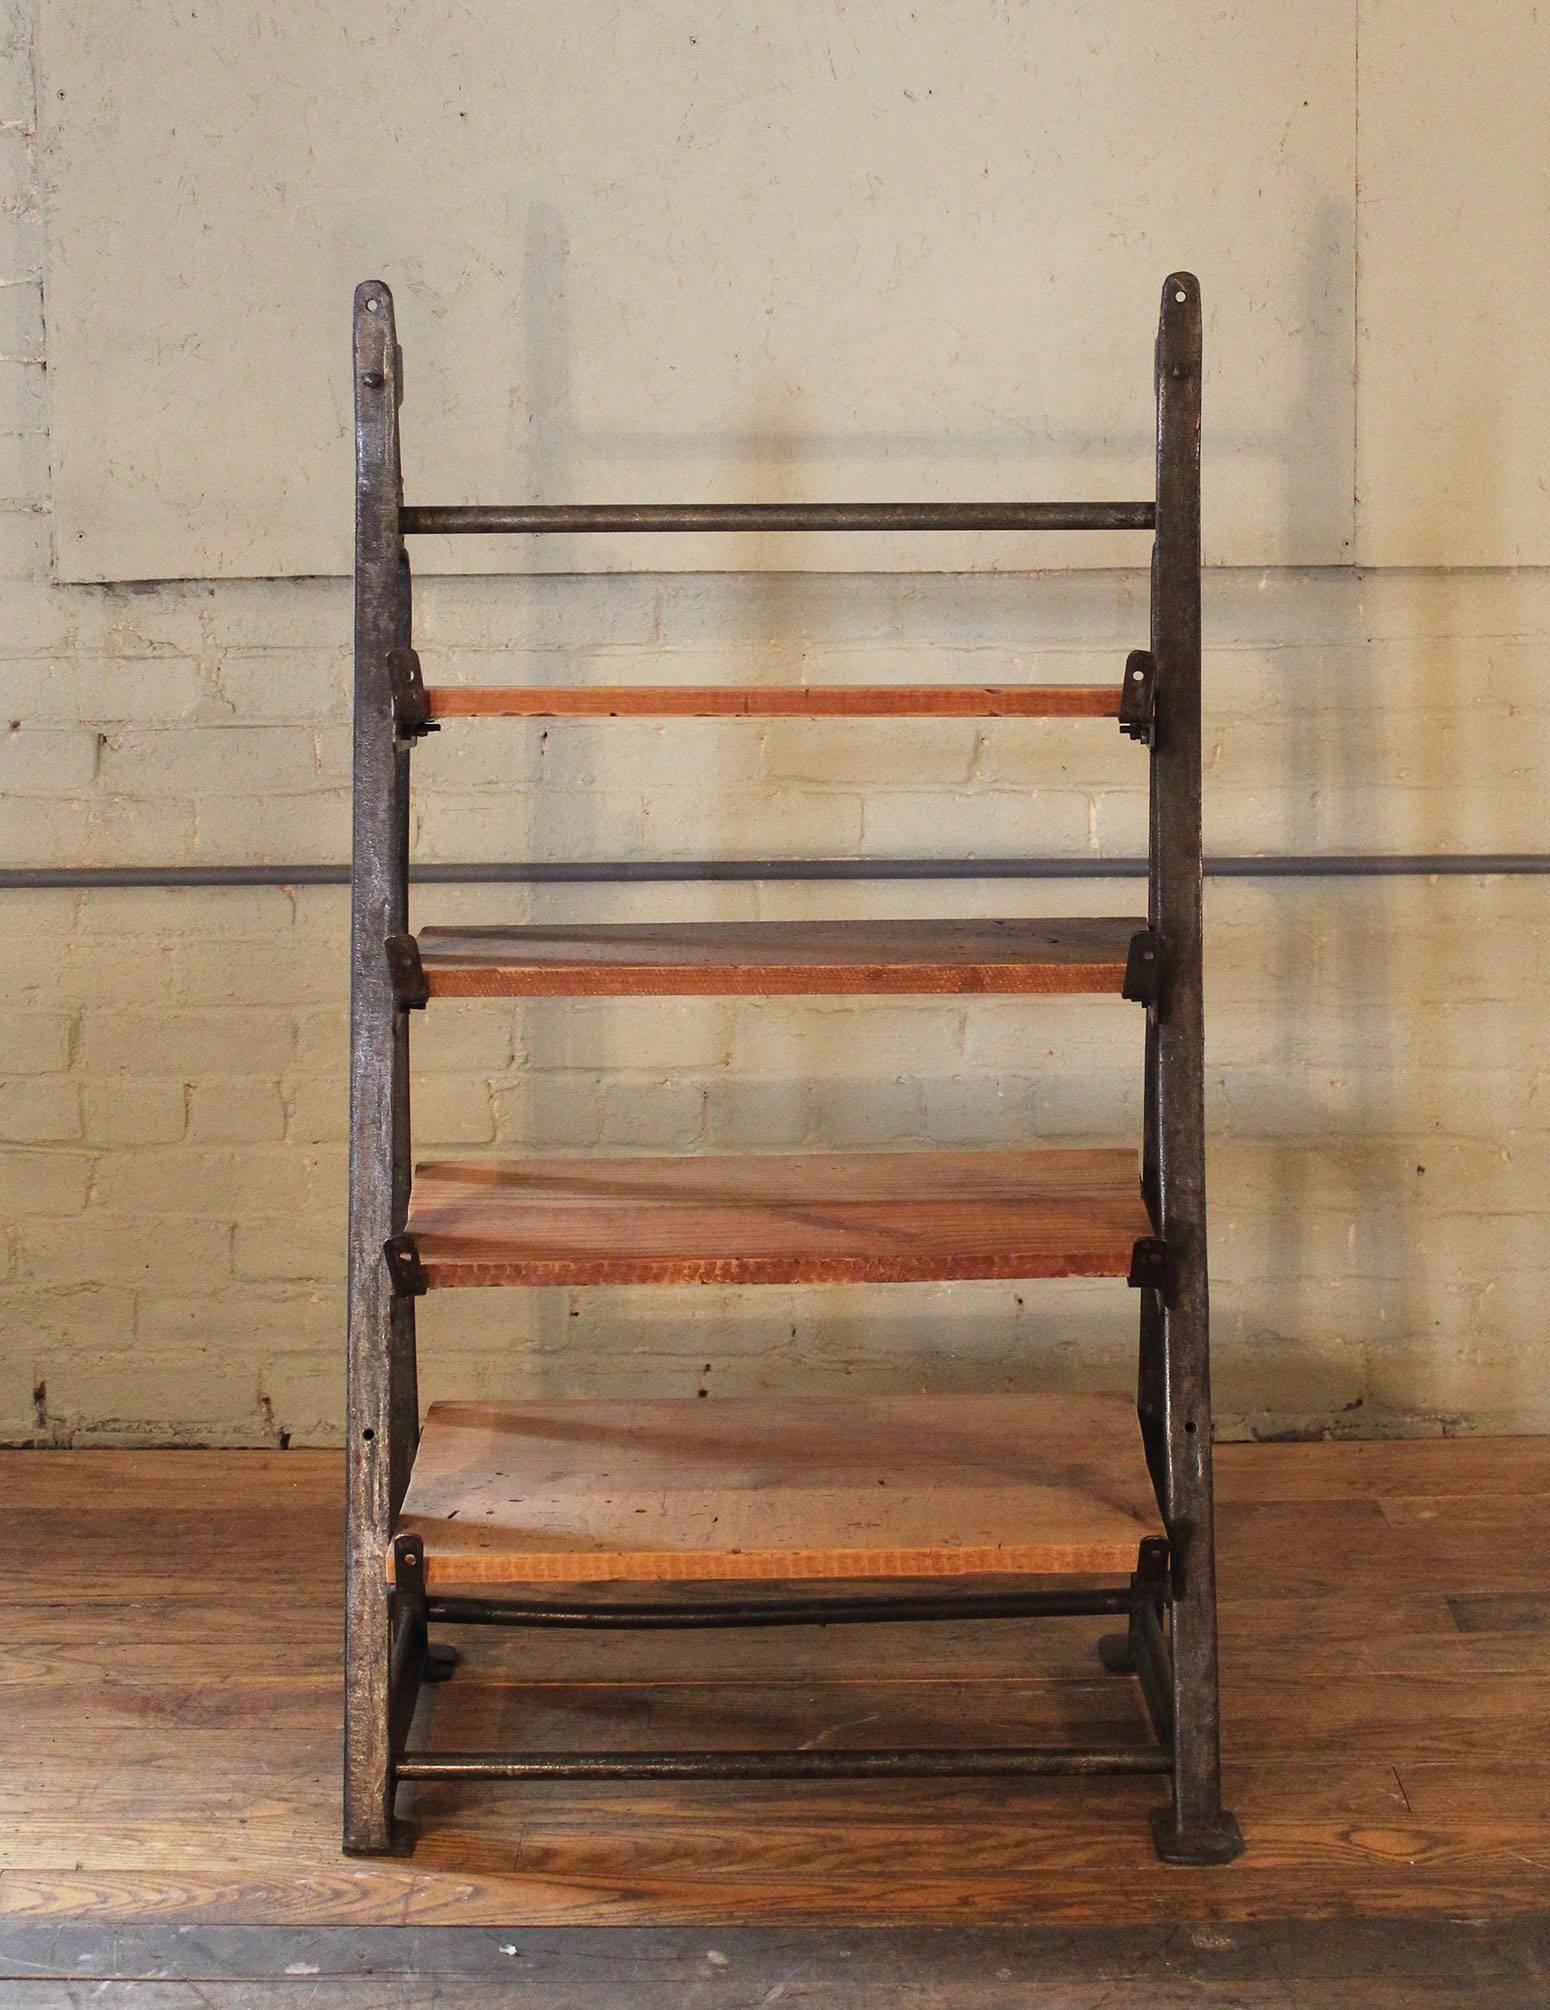 wood and iron shelves